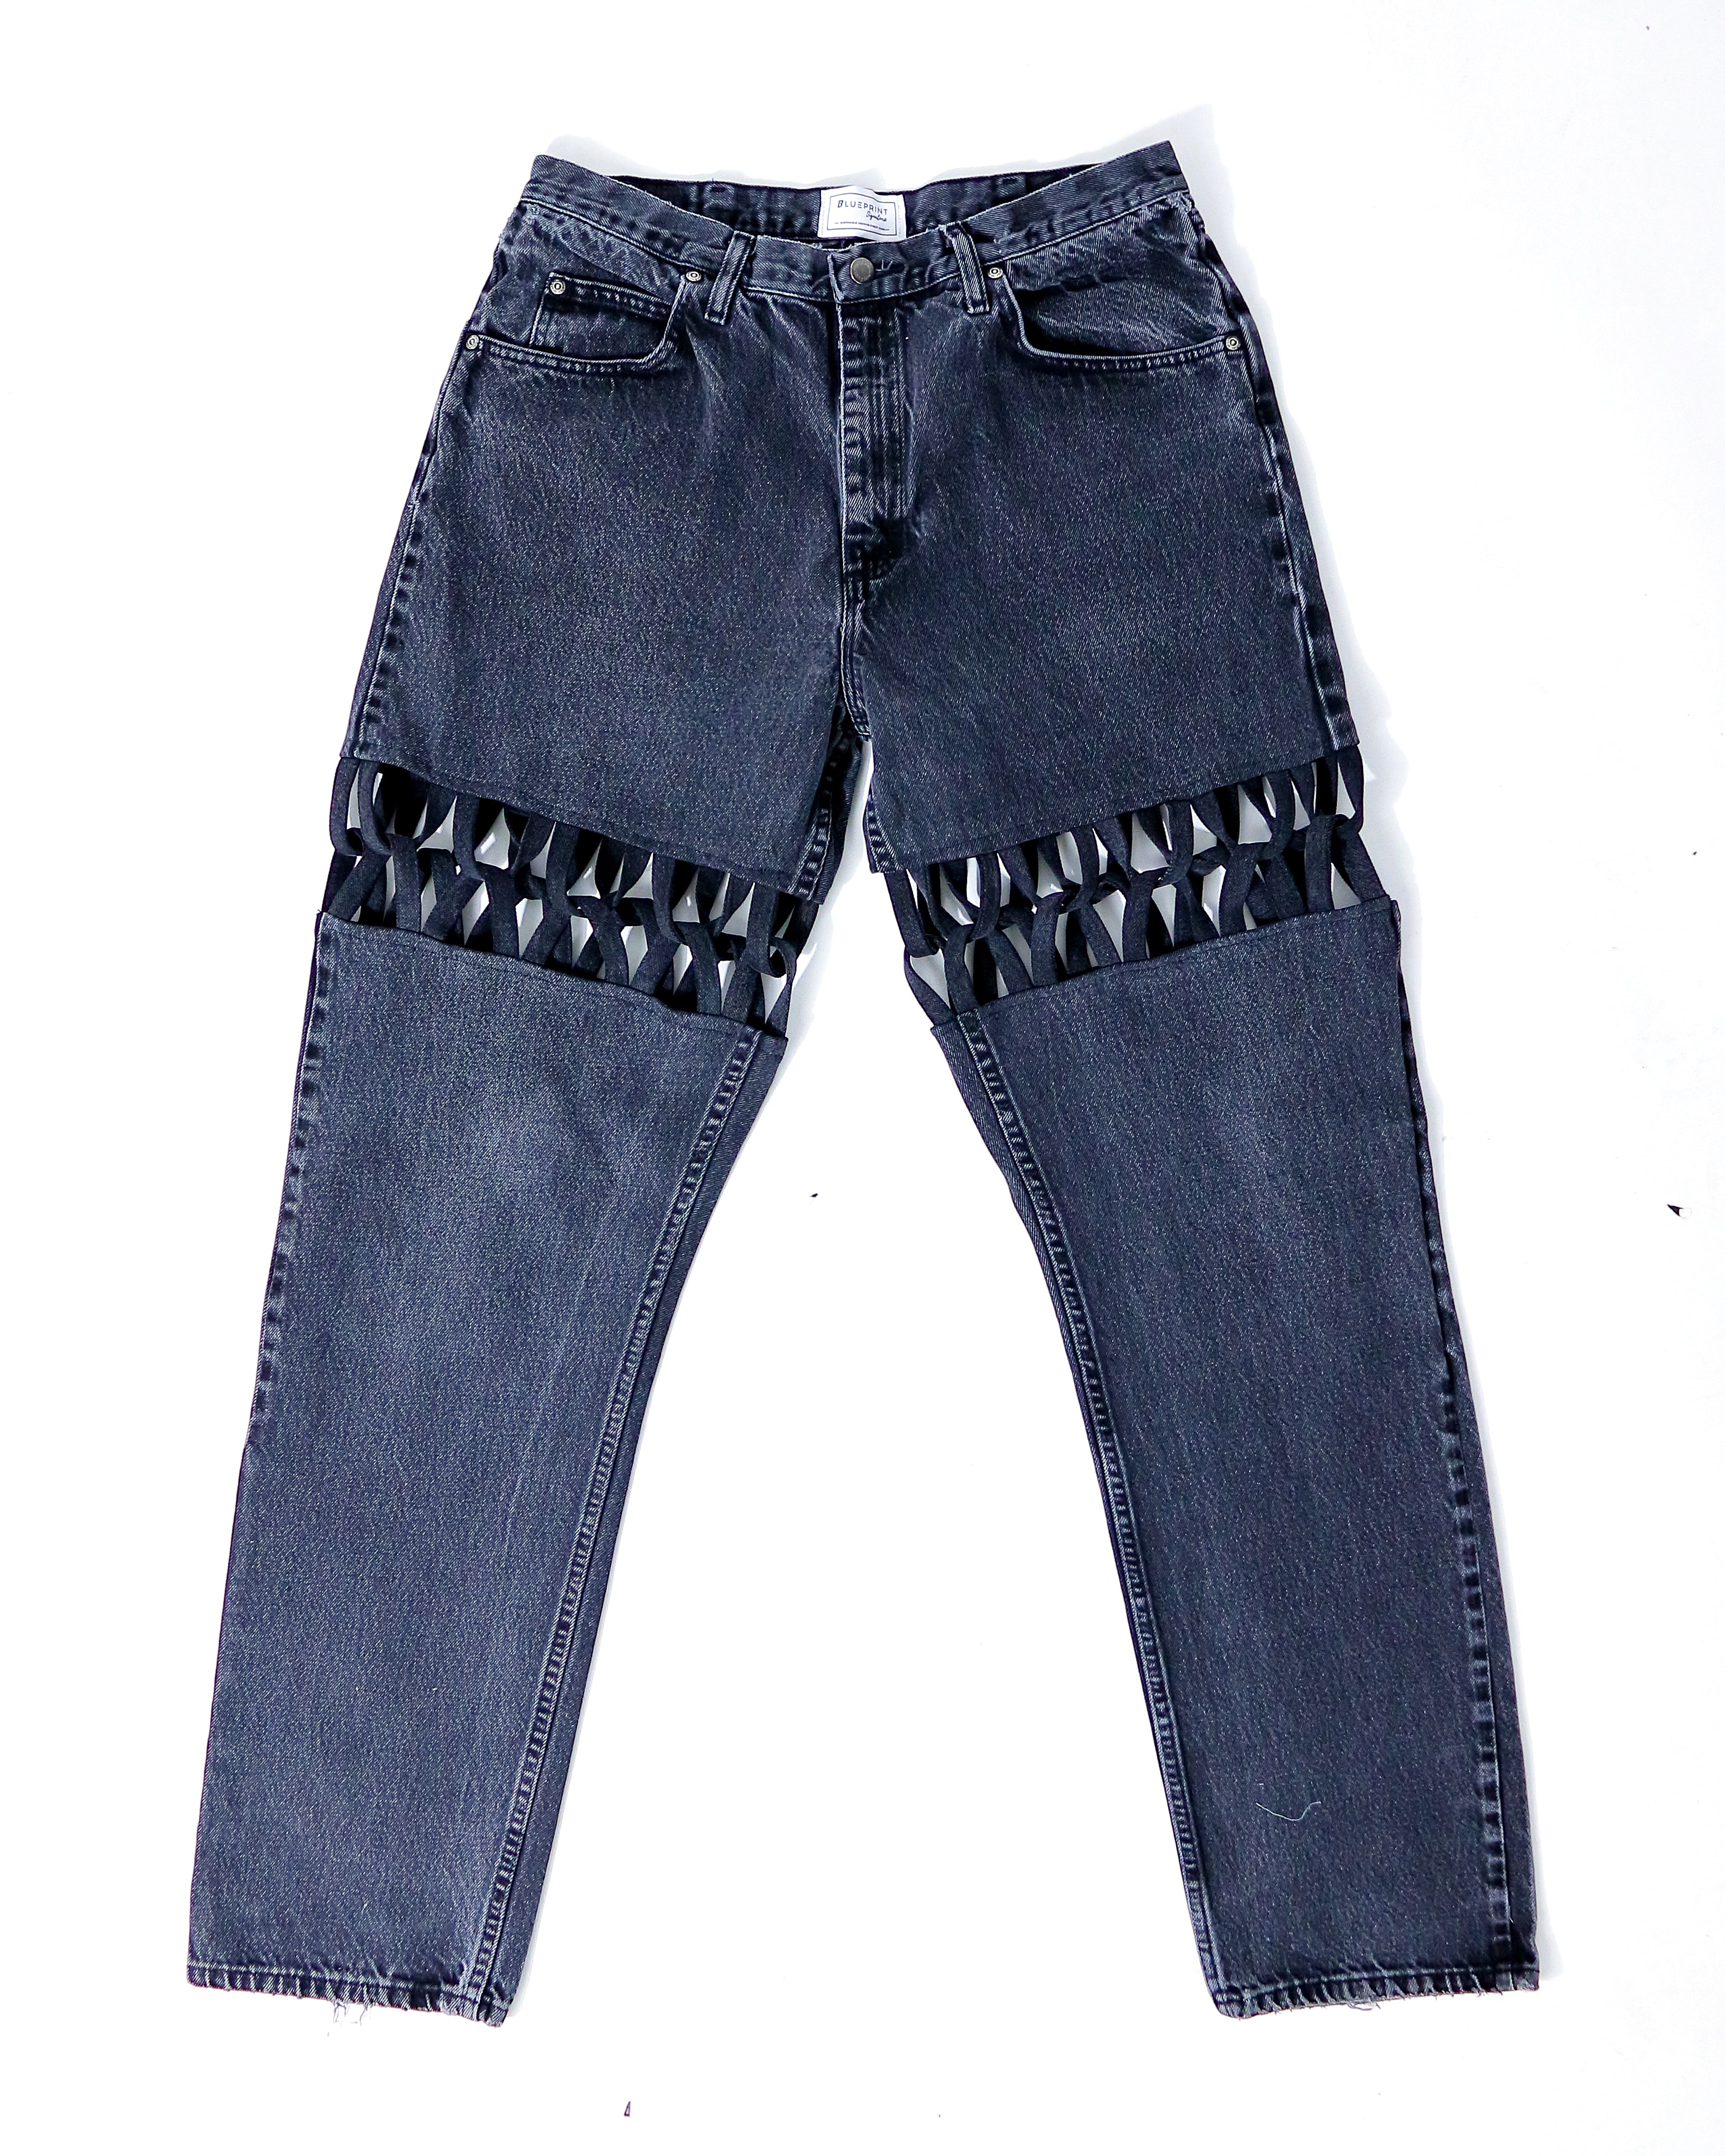 Criss Cross Jeans (Order Your Size)